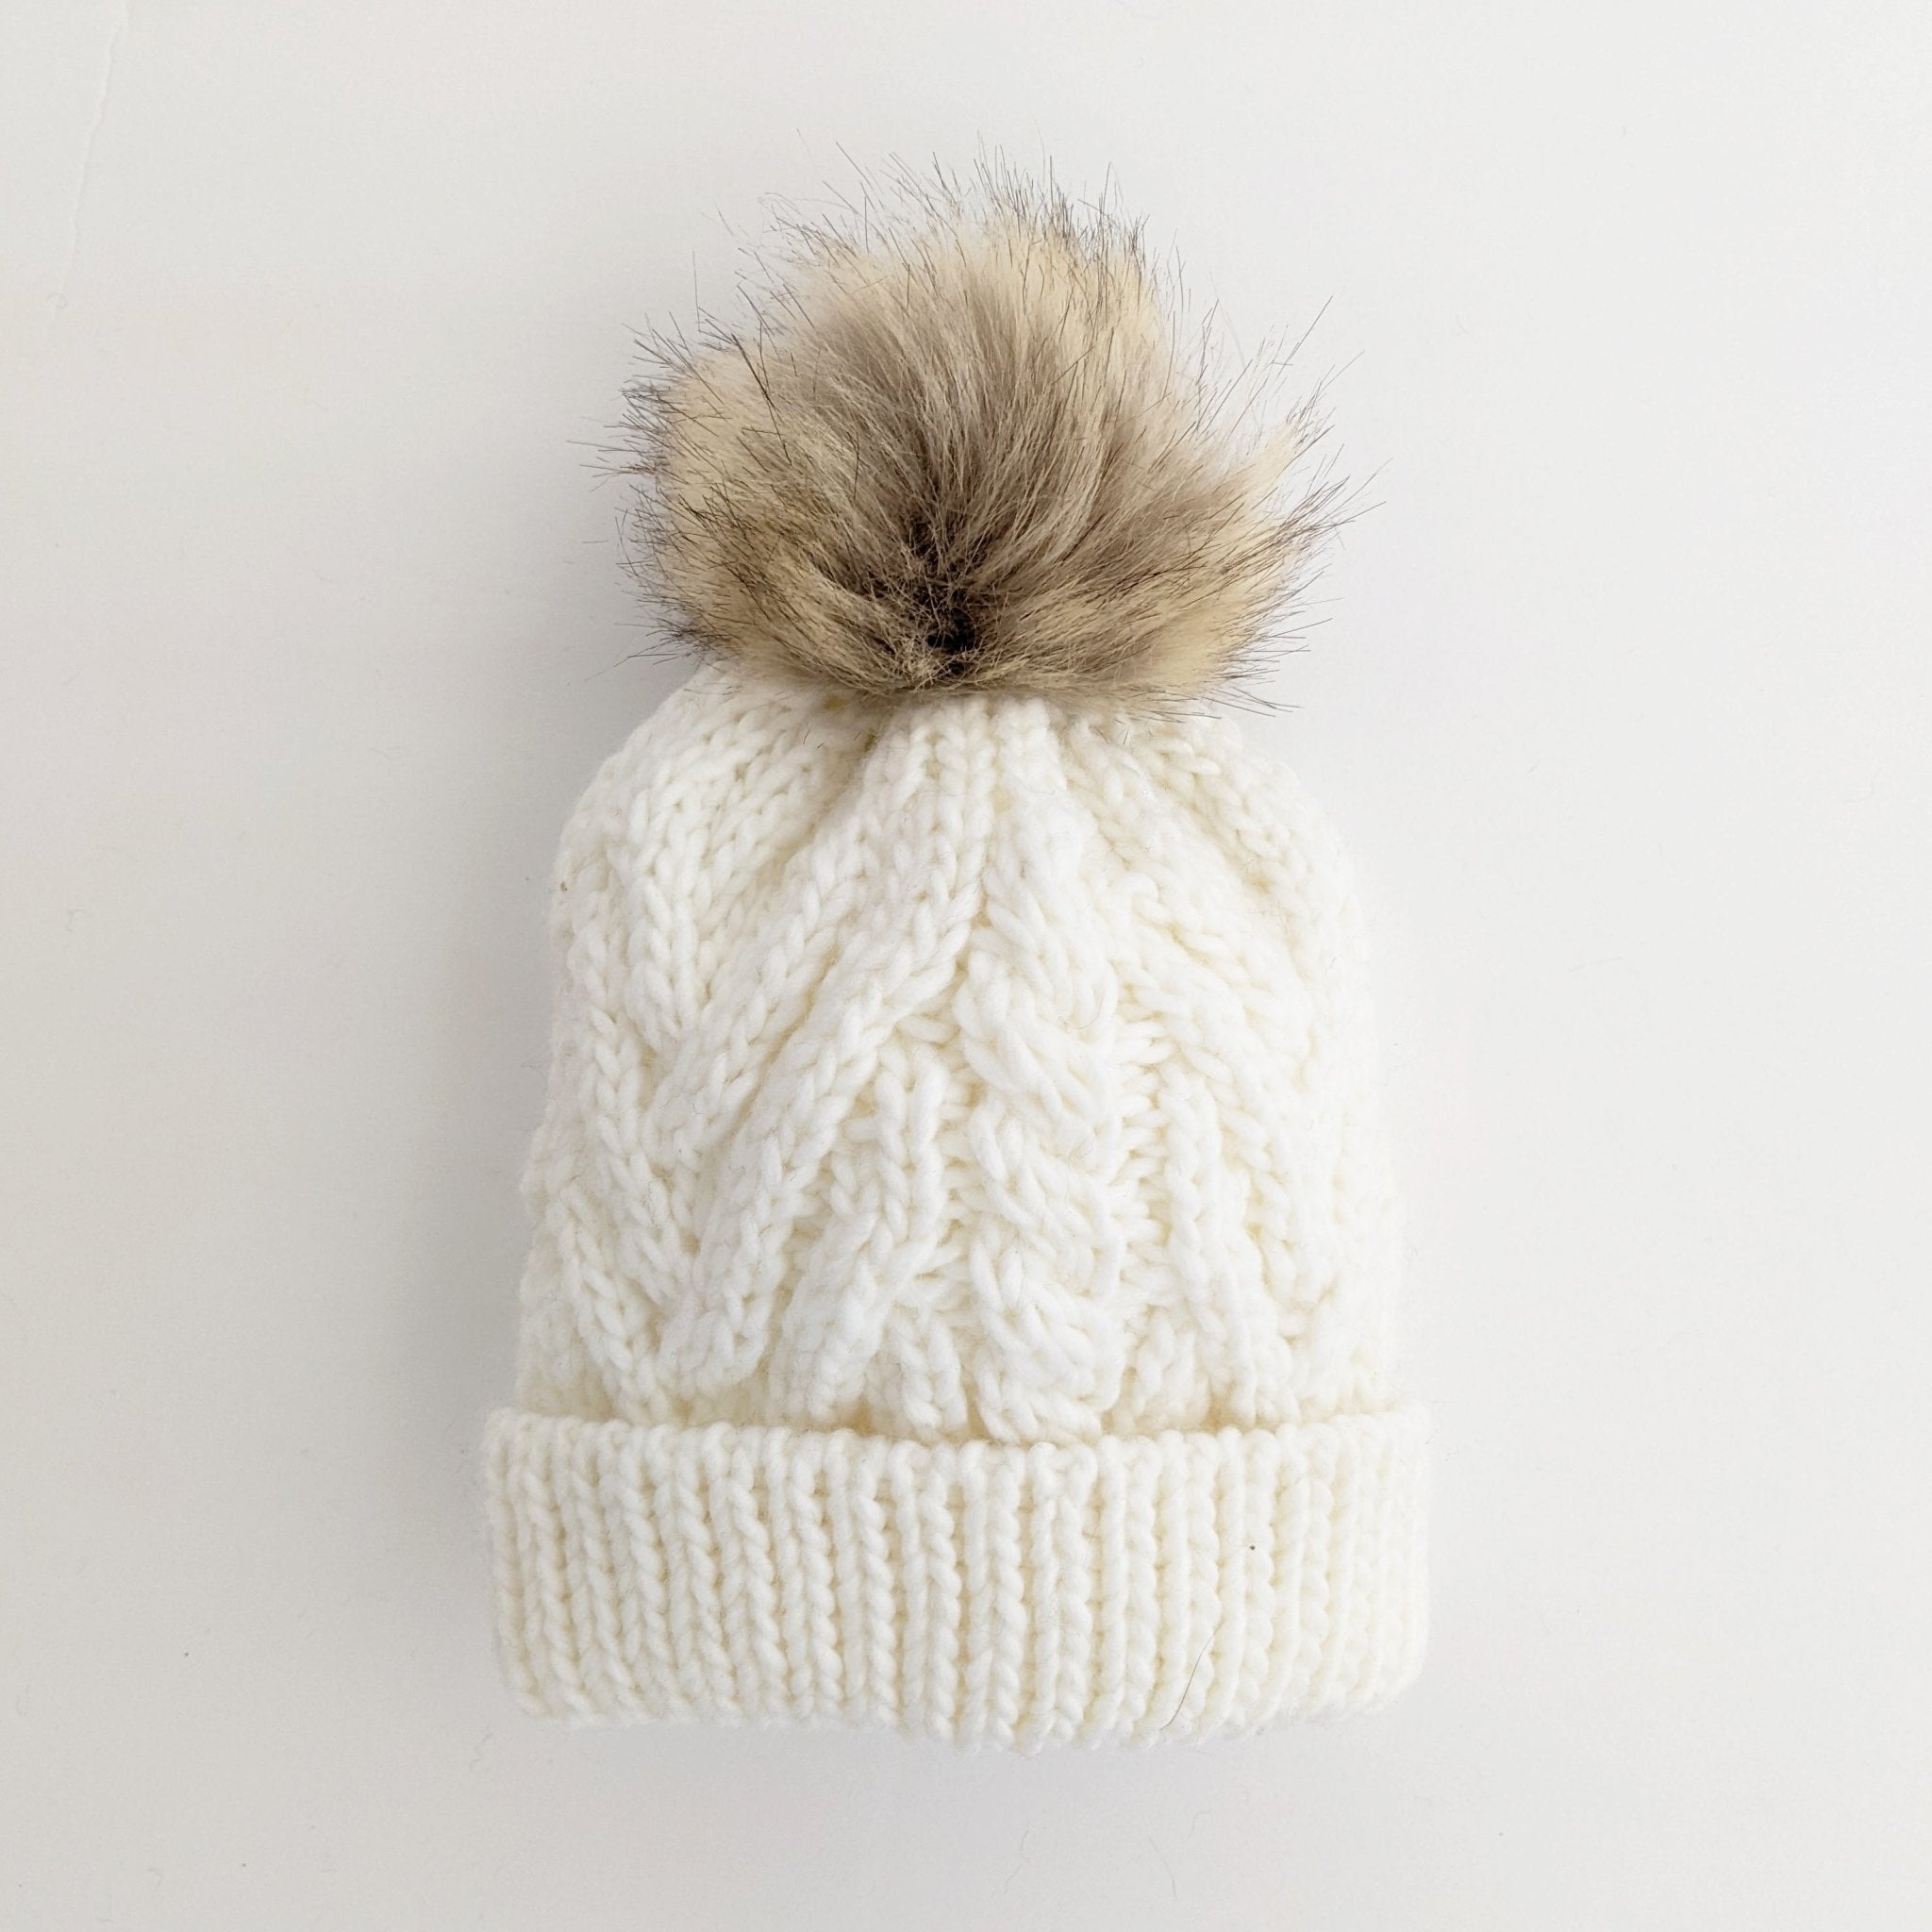 Huggalugs Loden Pom Pom Knitted Beanie Hat